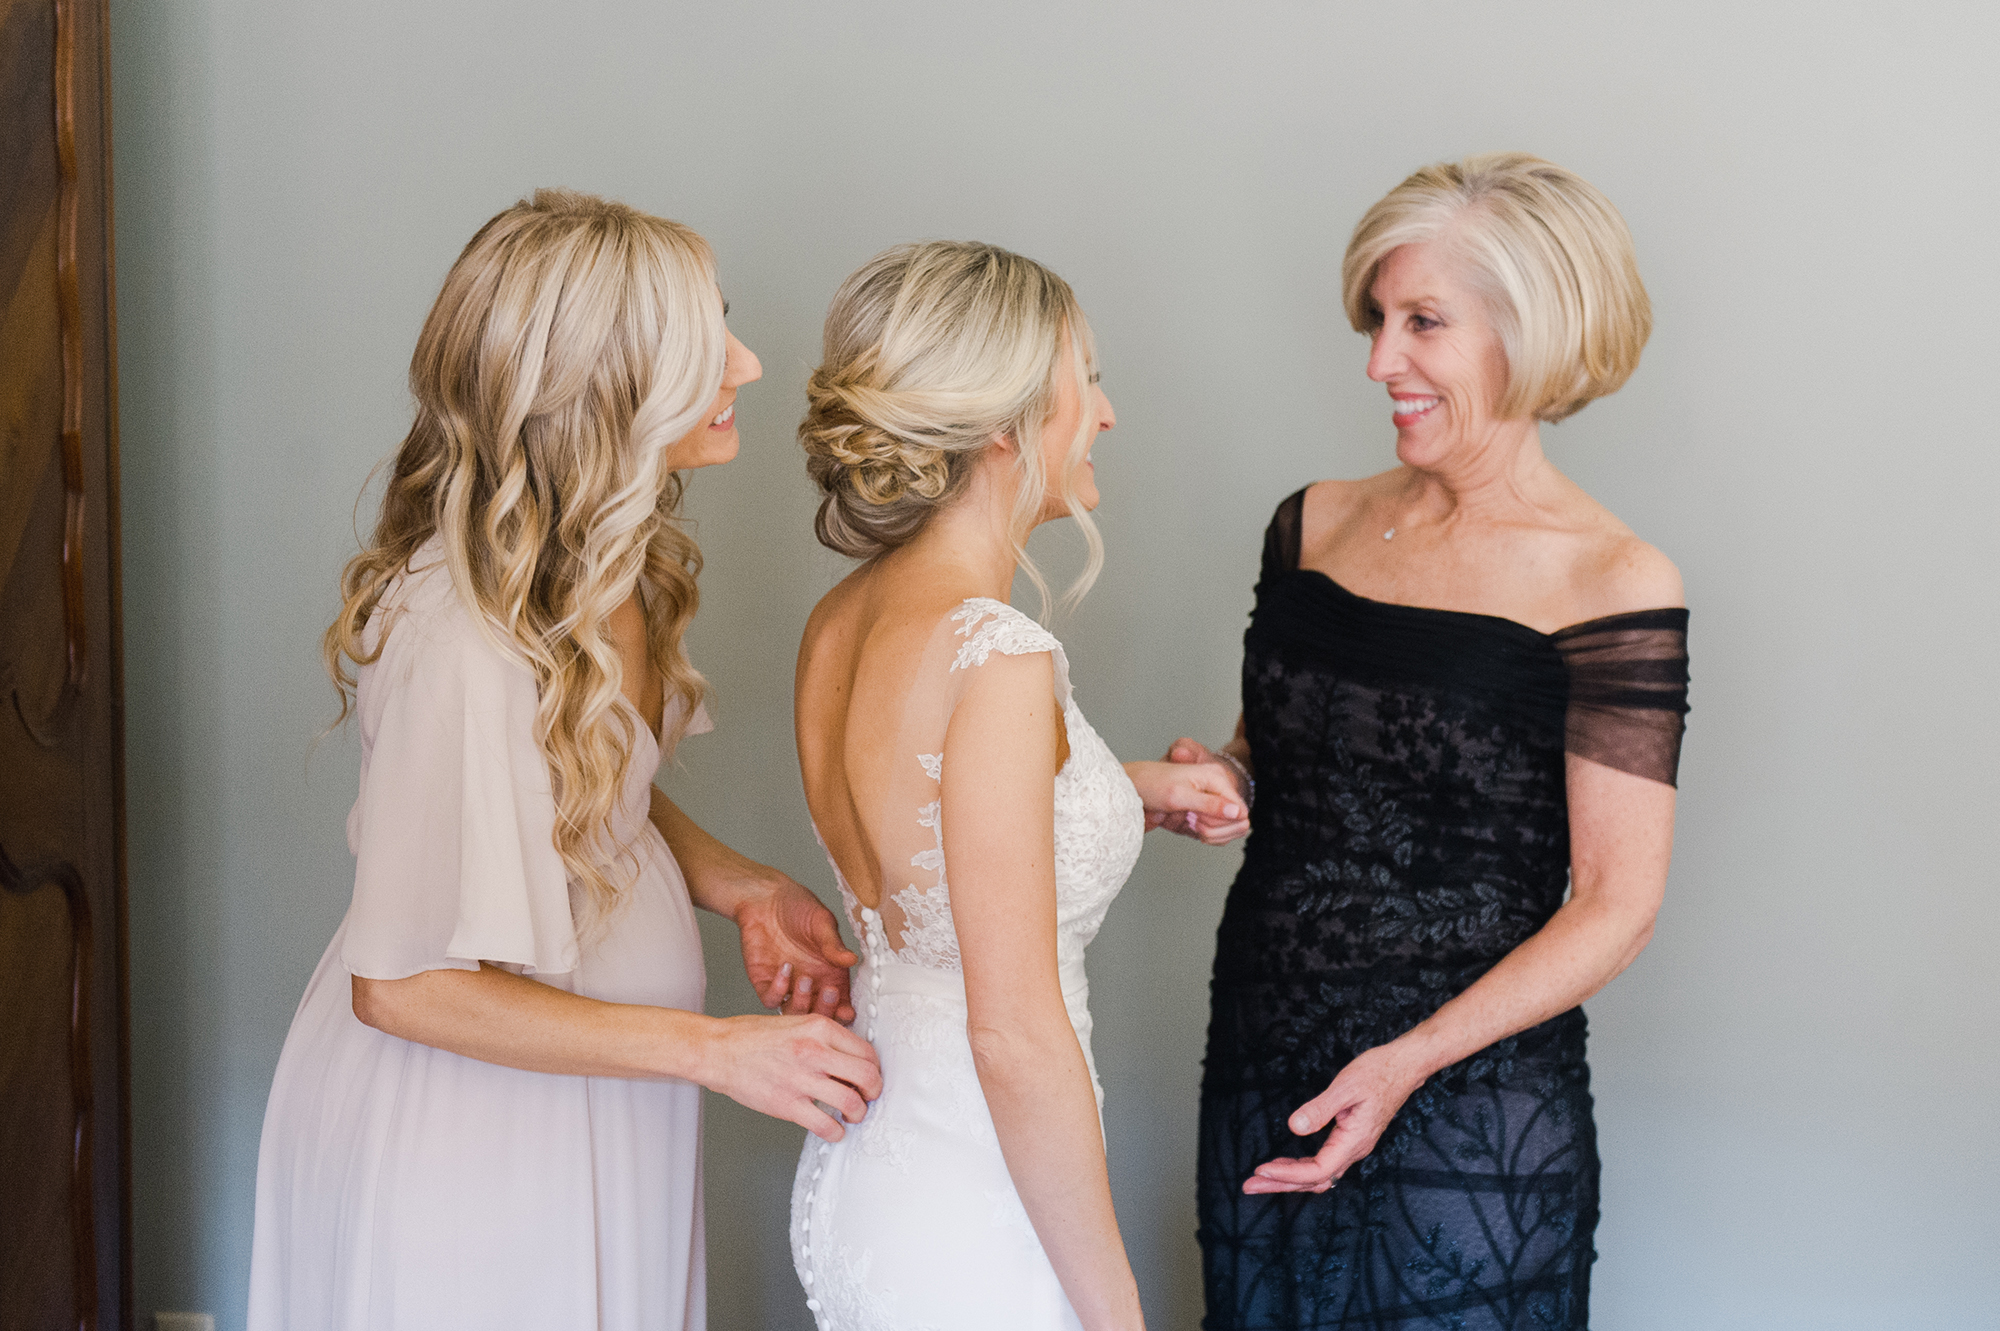  bride getting into wedding dress with mother and bridesmaids